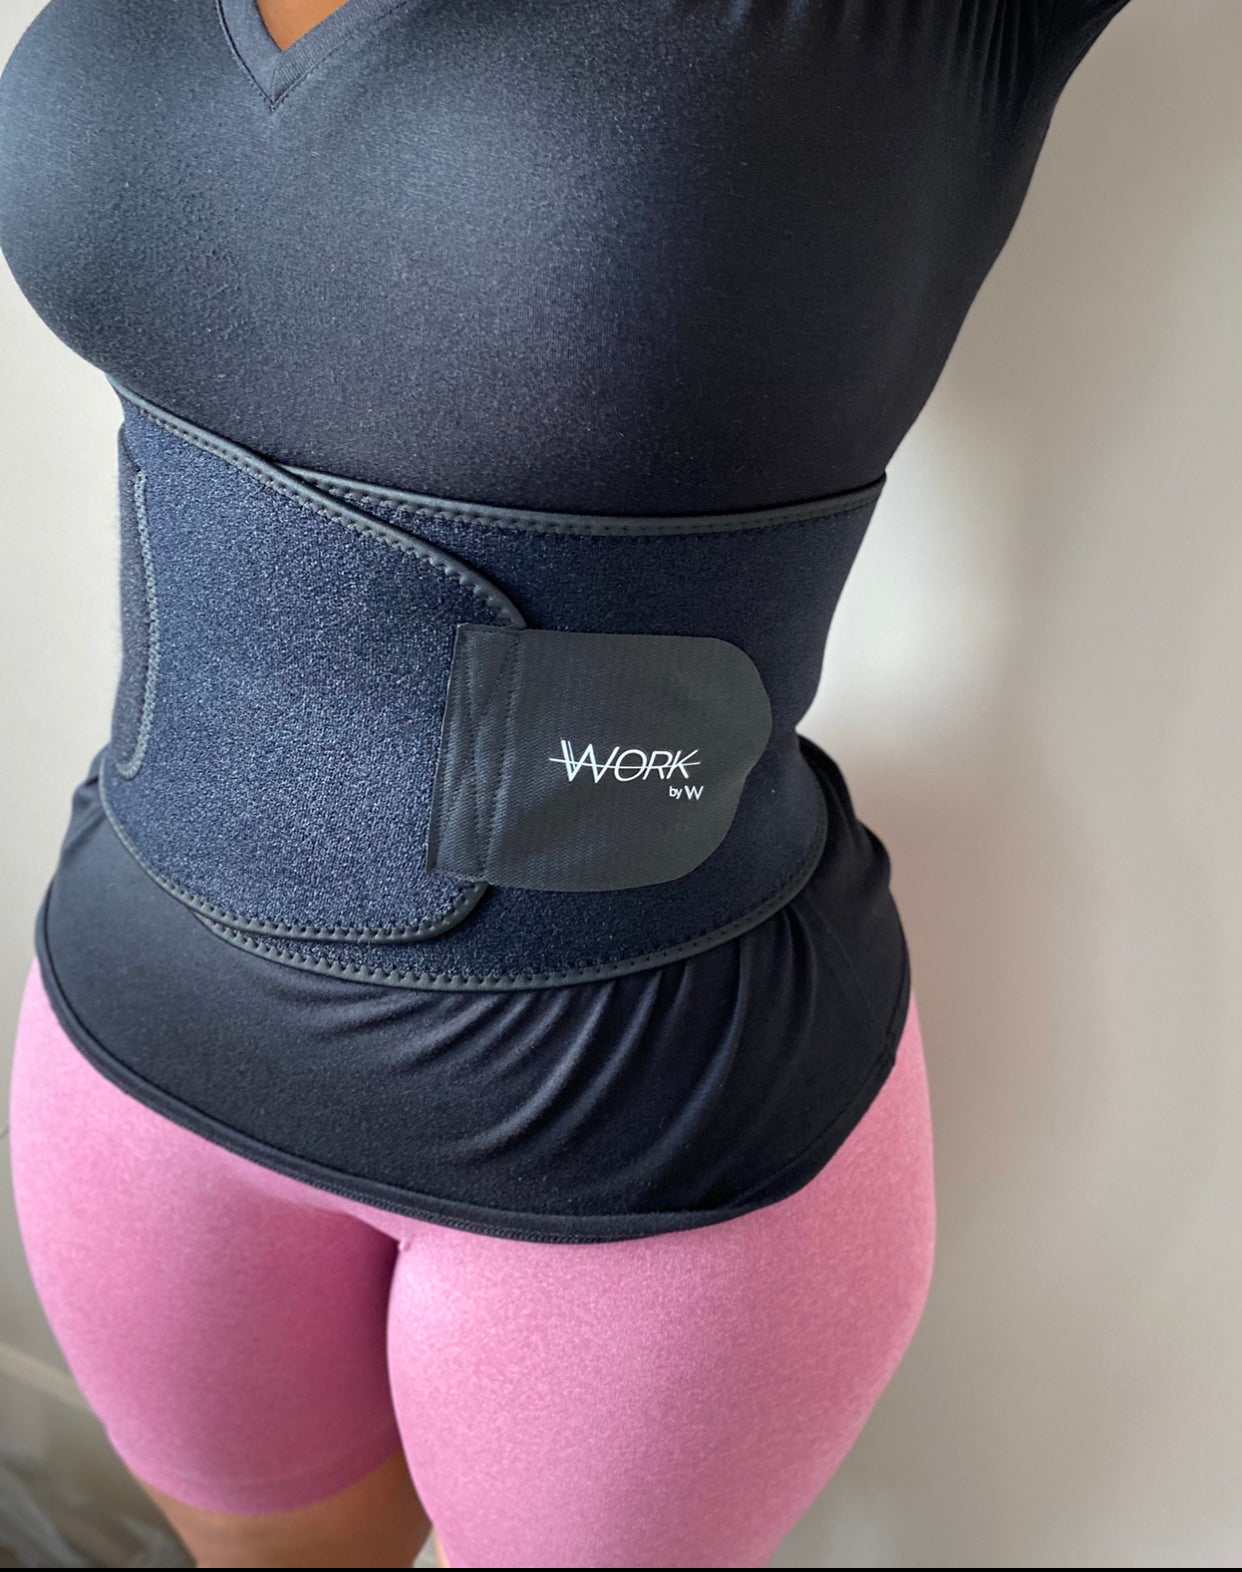 Sweat waist belt for gym workouts for men and women – W by Crystal